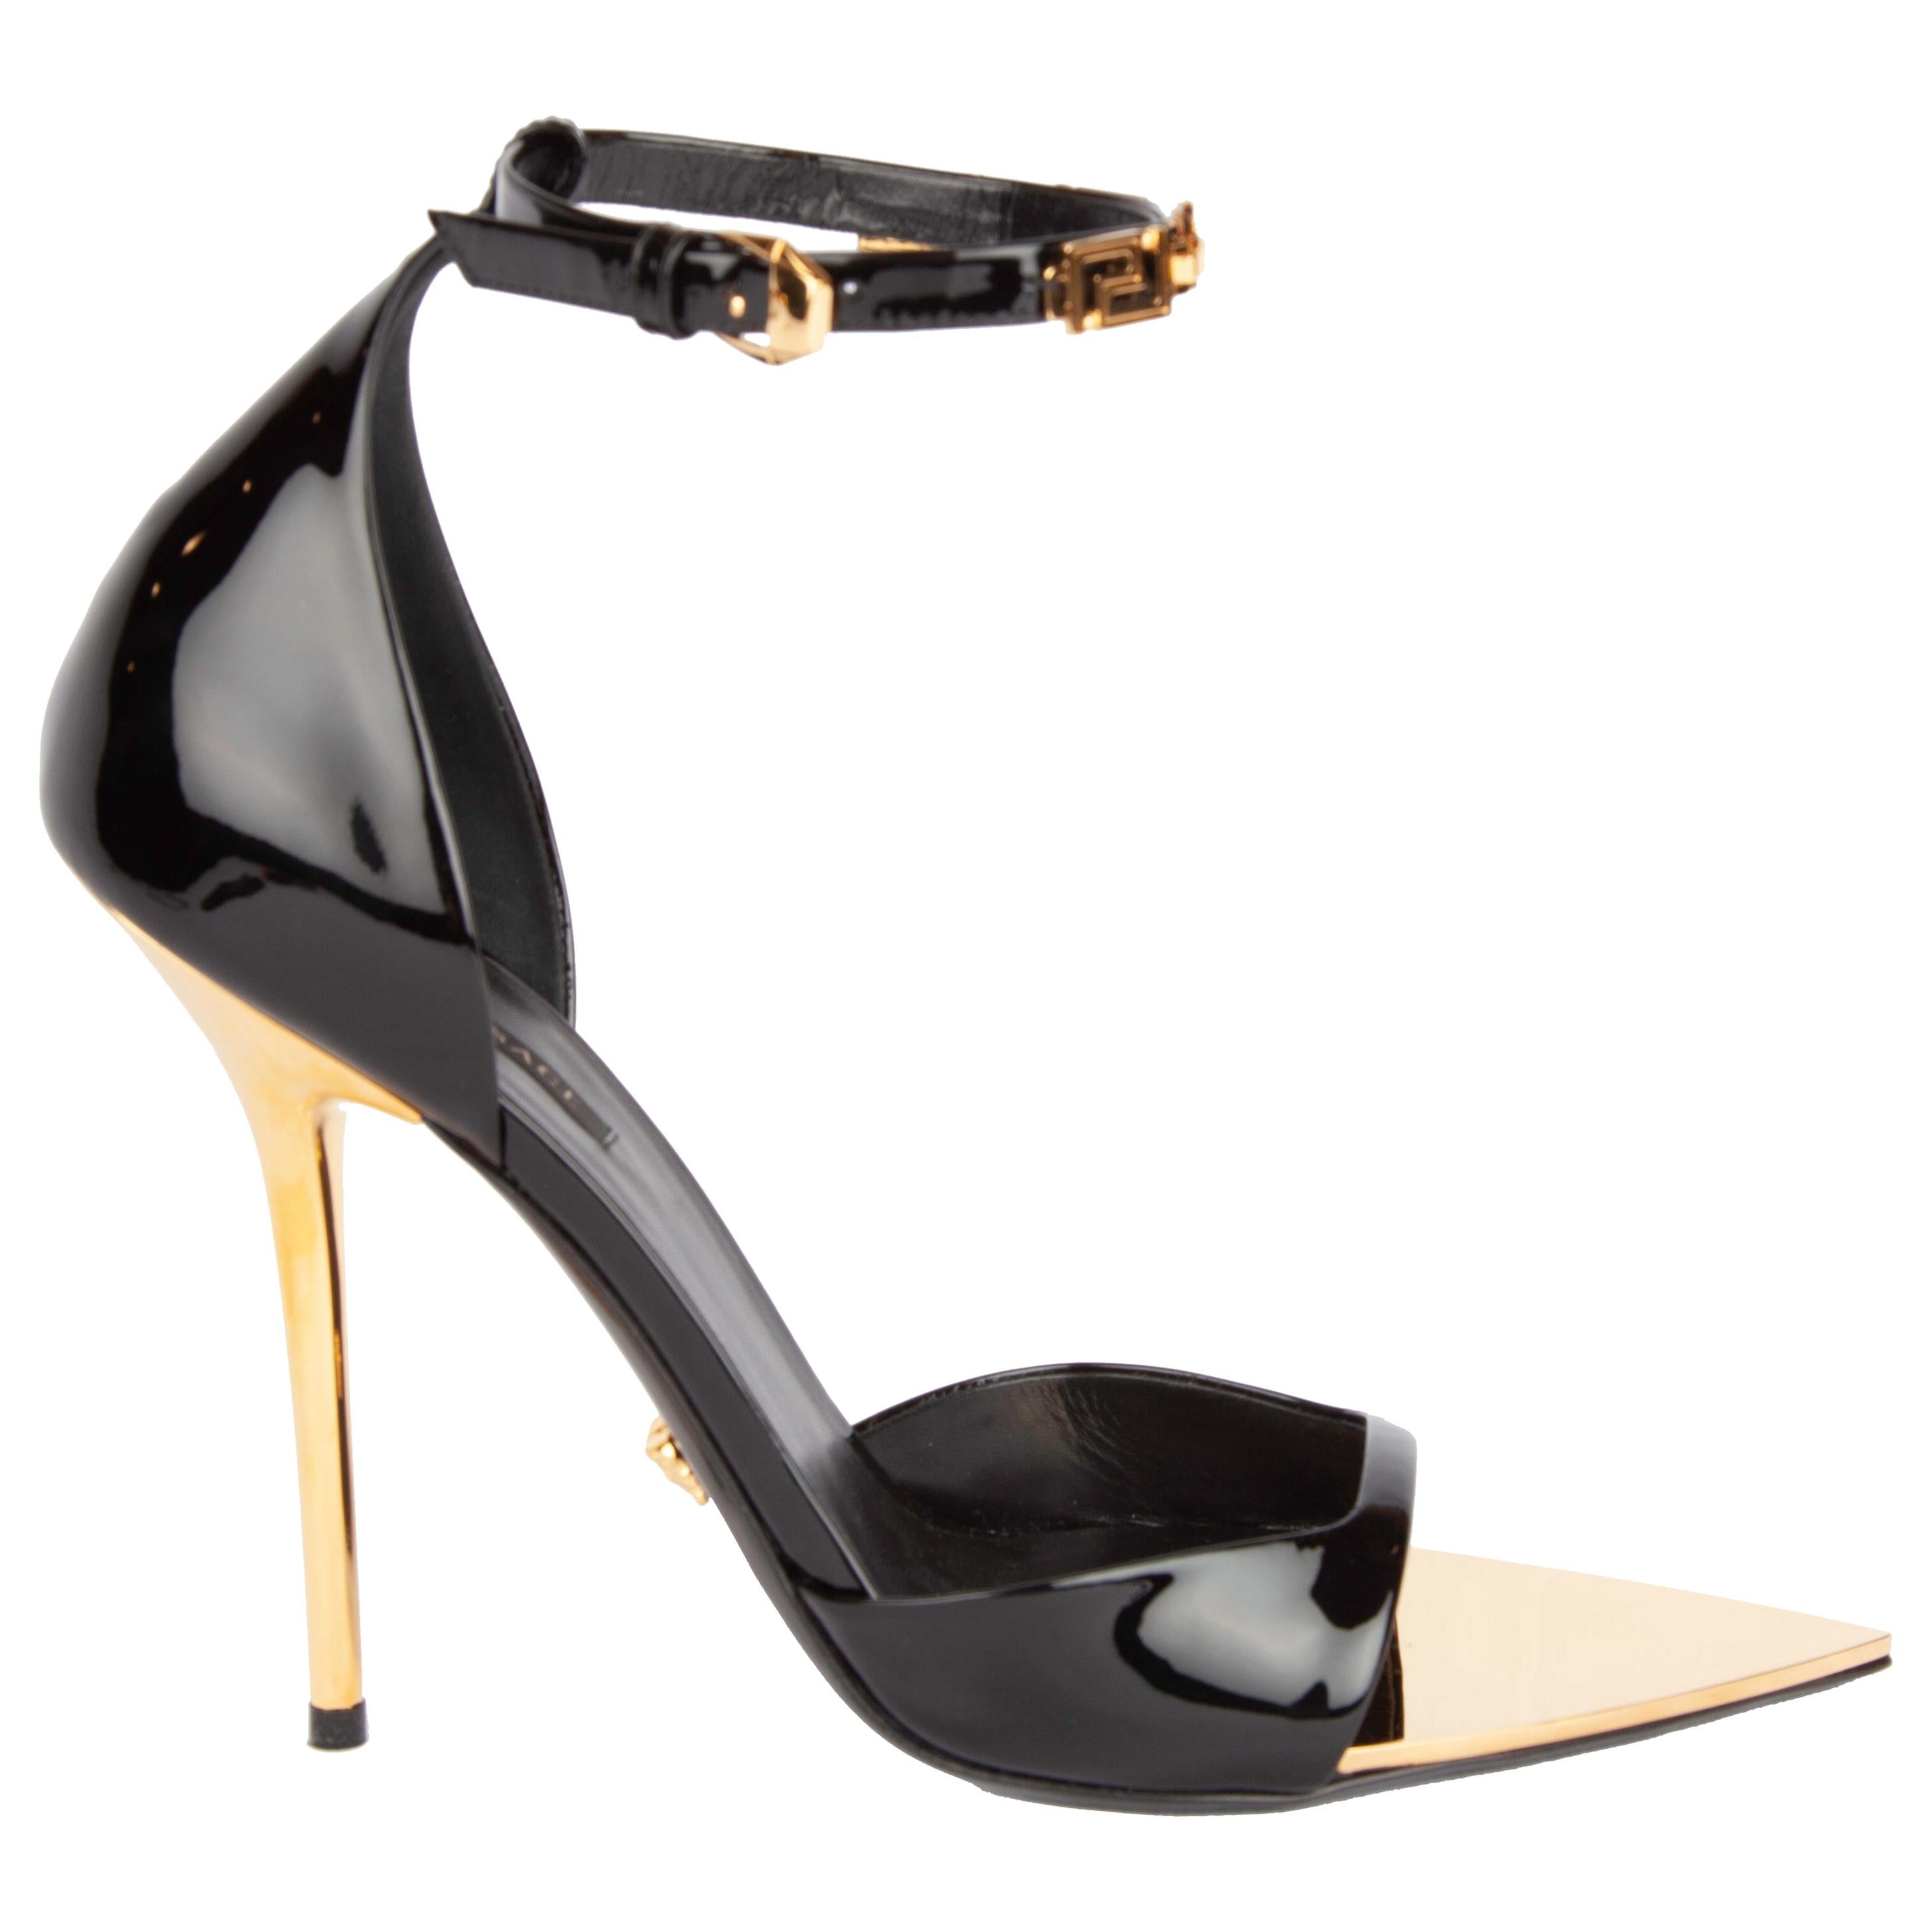 Versace Black Patent Leather Irina Strap Heels with Gold Tone Hardware Size 37